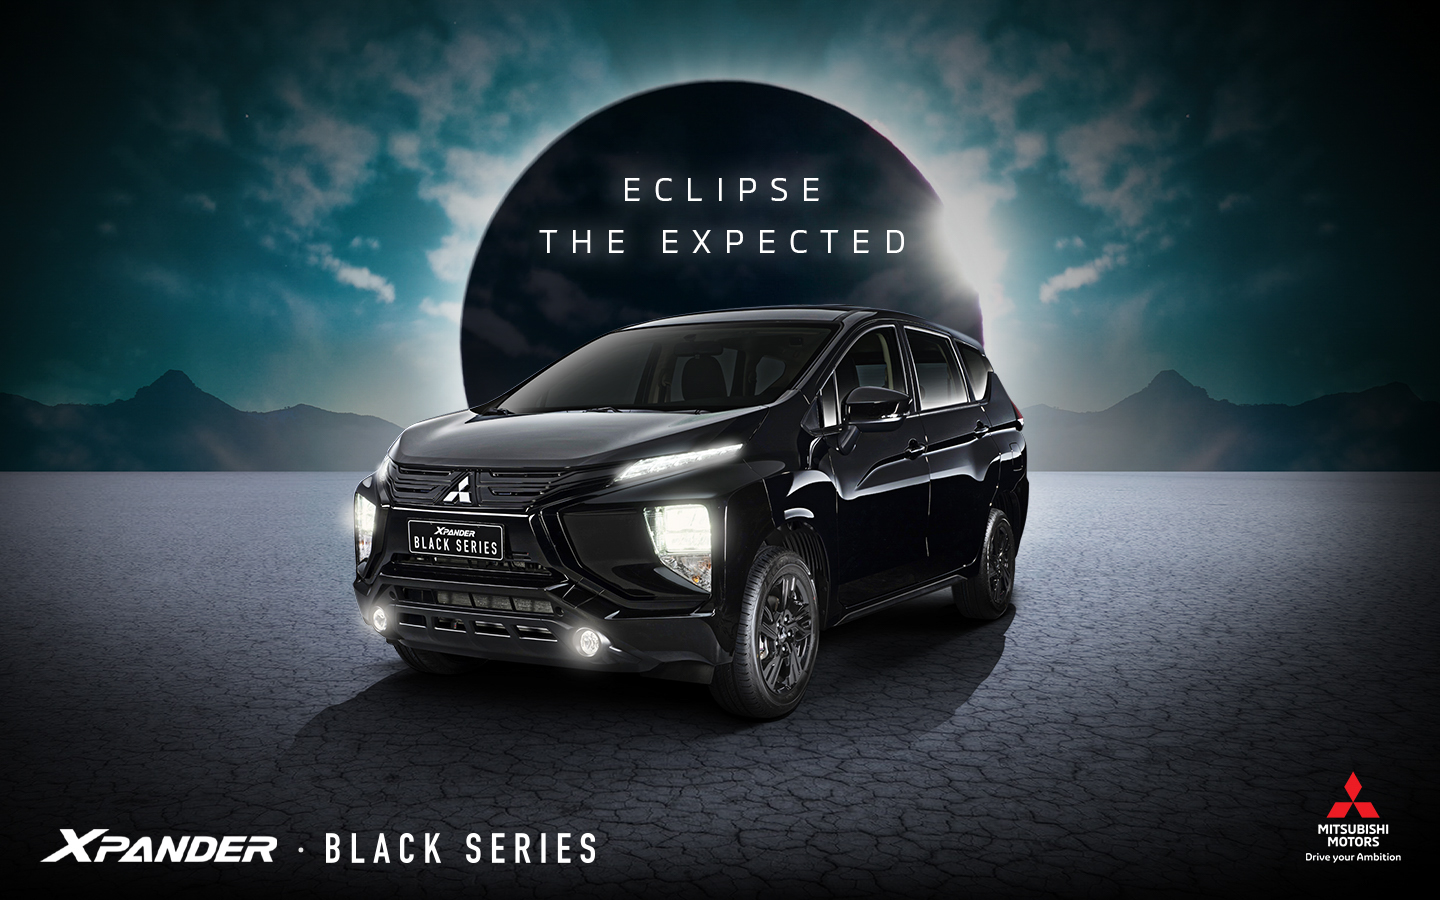 Mitsubishi Xpander Black Series: Eclipse the Expected